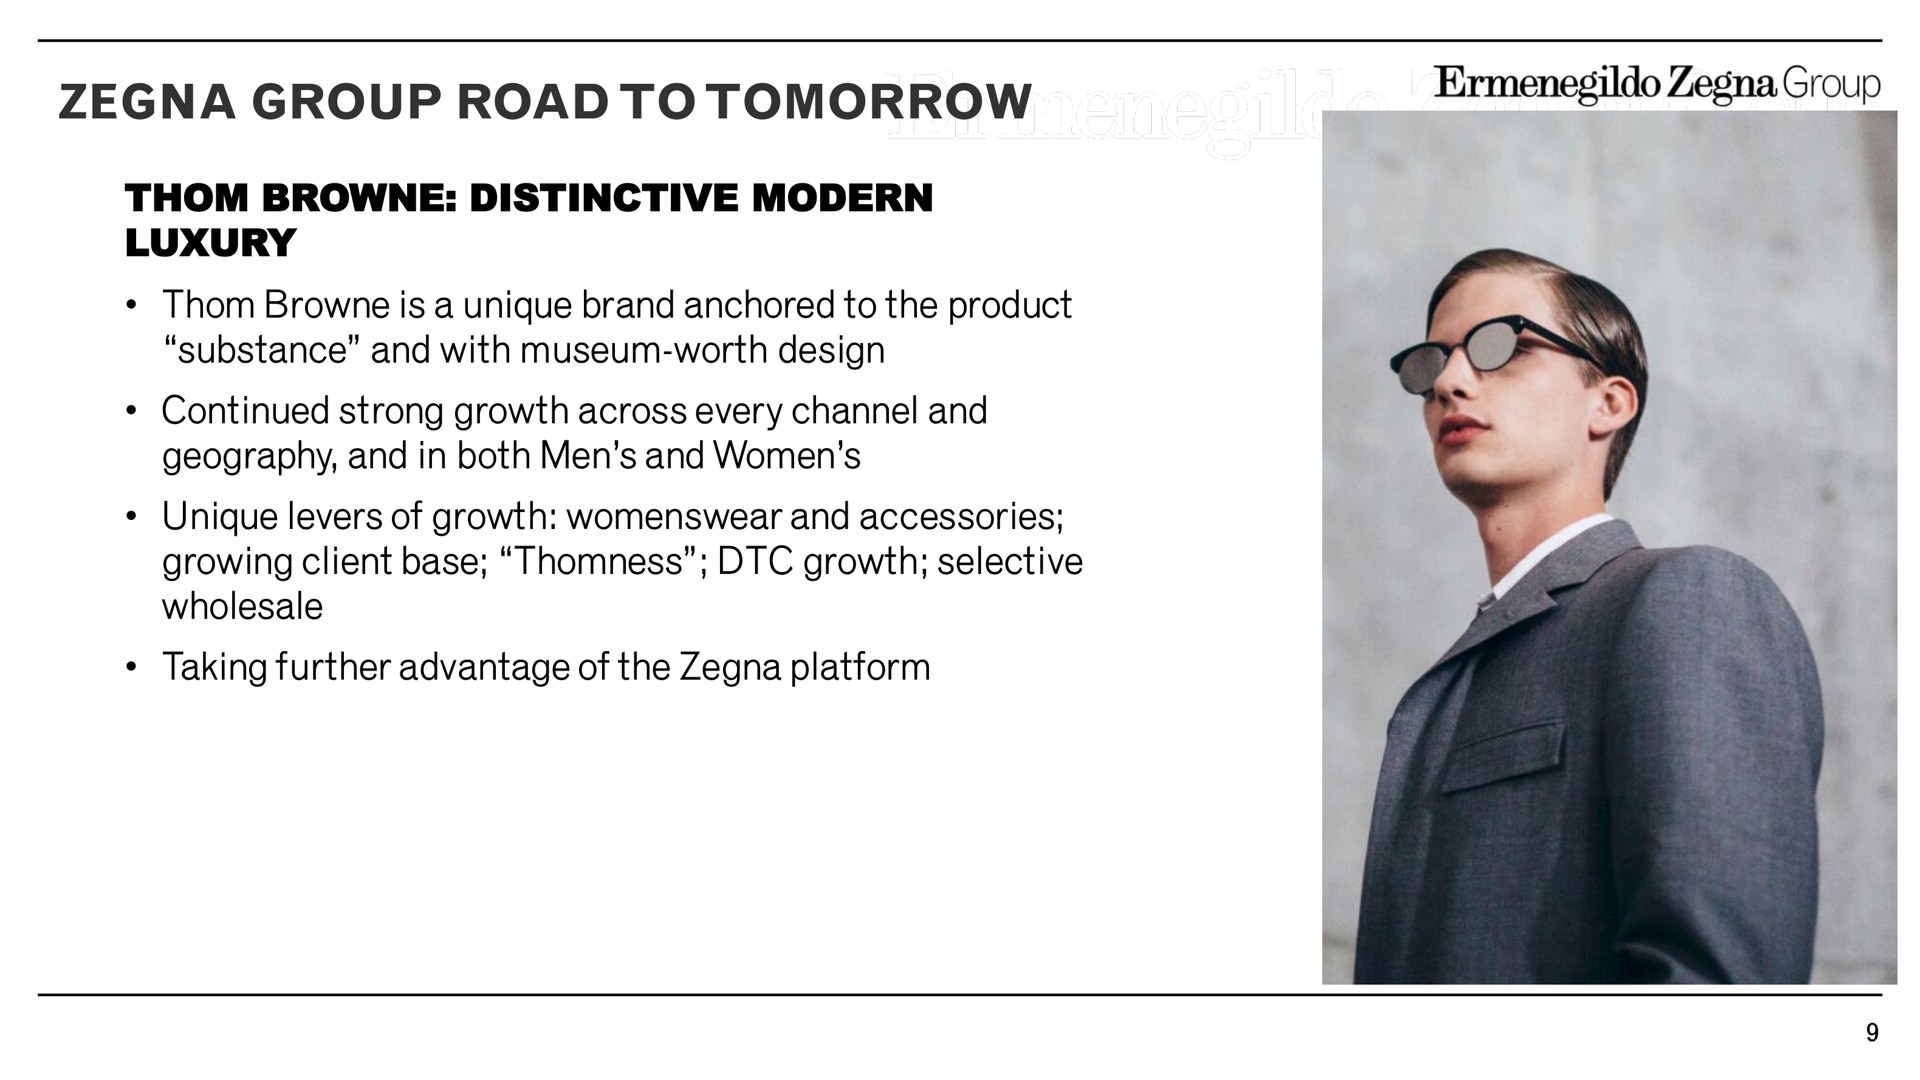 group road to tomorrow distinctive modern luxury is a unique brand anchored to the product substance and with museum worth design continued strong growth across every channel and geography and in both men and women unique levers of growth and accessories growing client base growth selective wholesale taking further advantage of the platform | Zegna